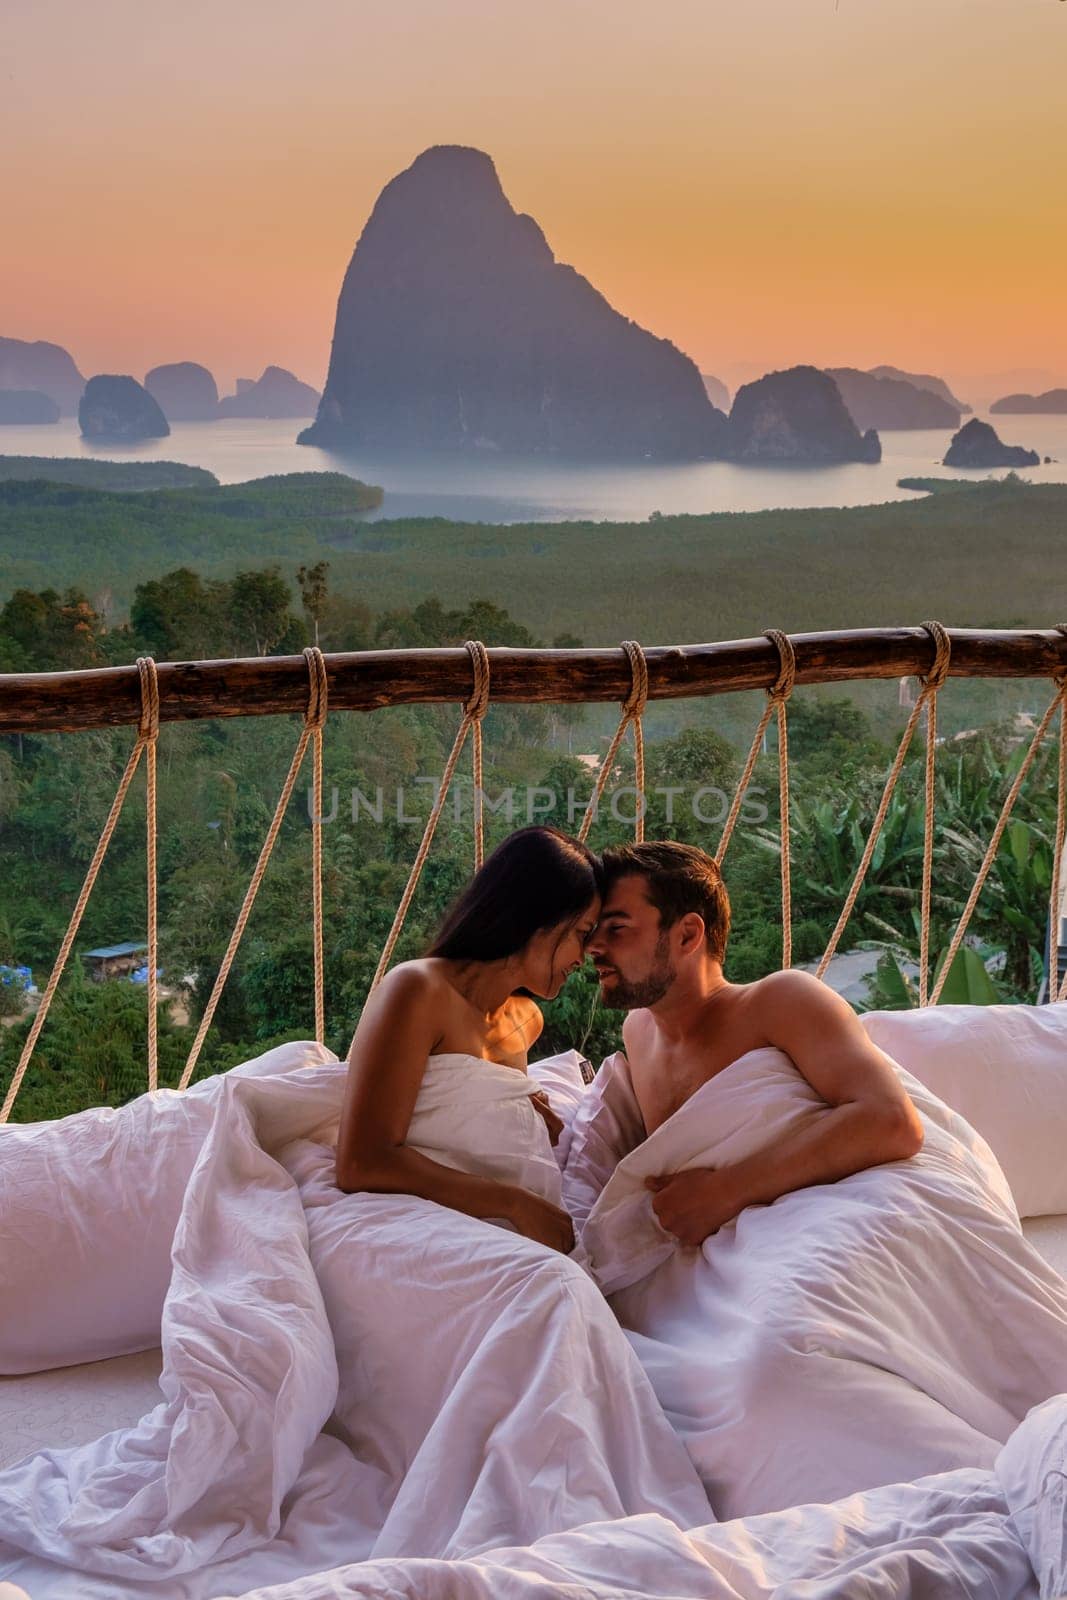 A couple in an outdoor bedroom watching the sunrise over Sametnangshe mountains in Phangnga Bay with mangrove forest in the Andaman Sea, men and woman in an outdoor bed hugging together